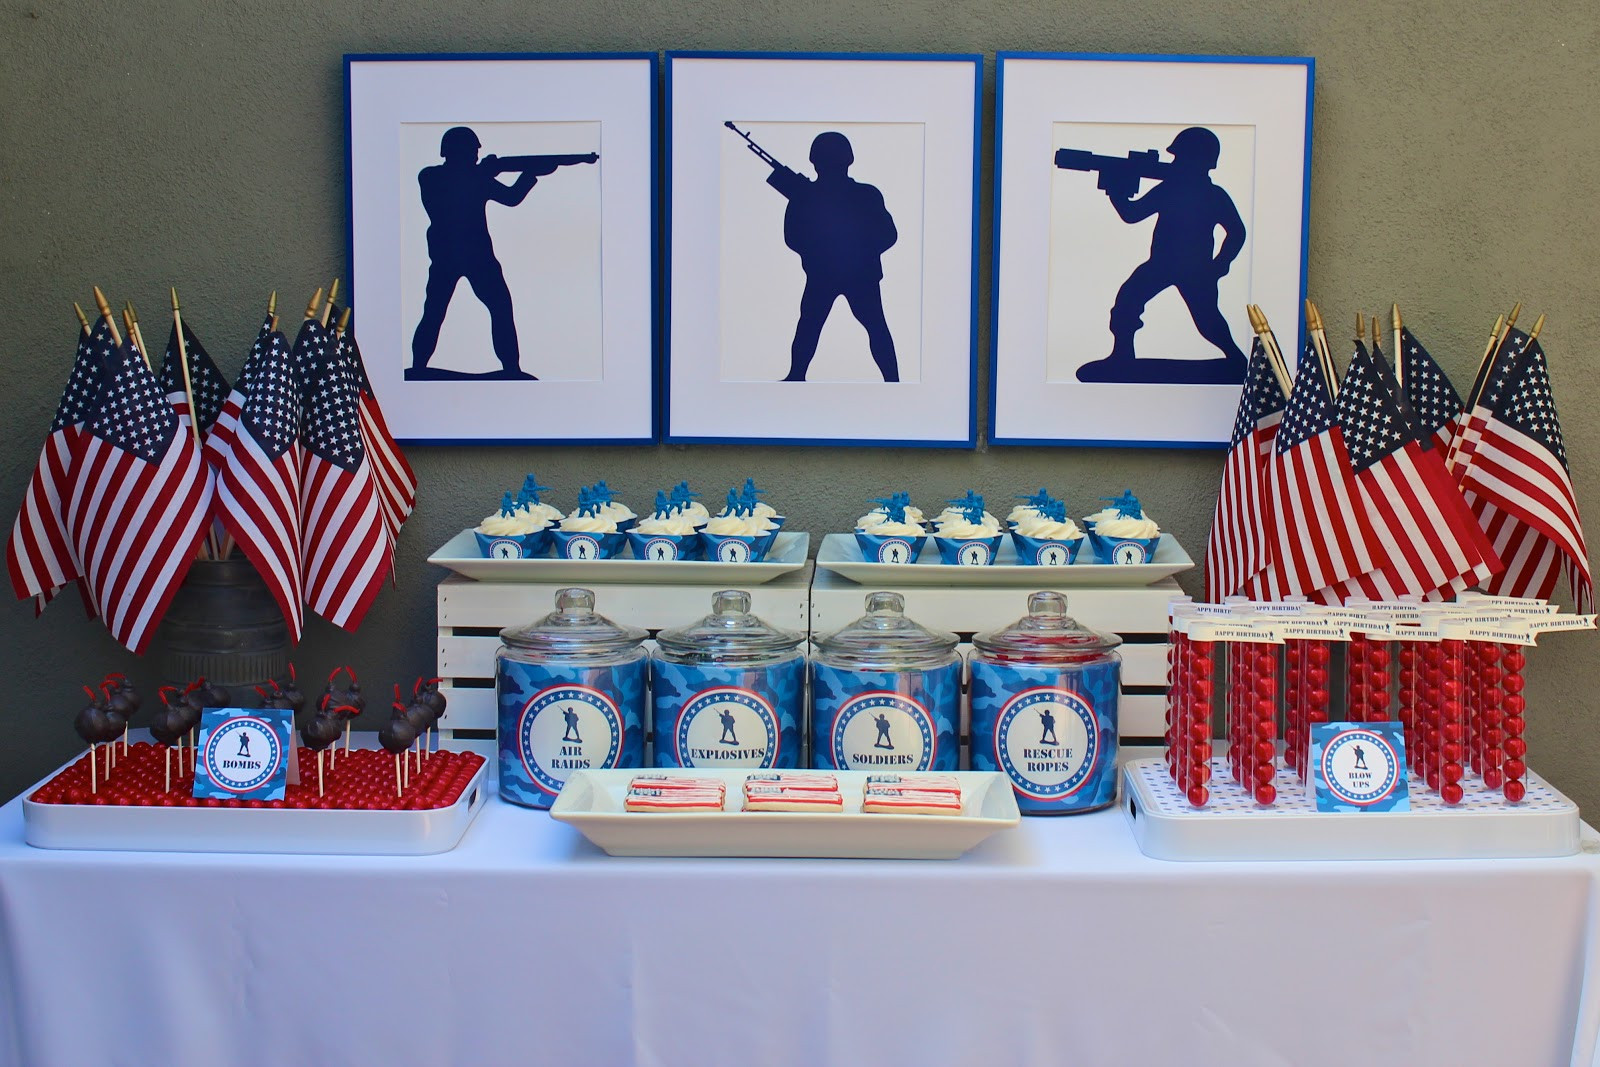 Navy Retirement Party Ideas
 bloom designs Military Party in Bloom